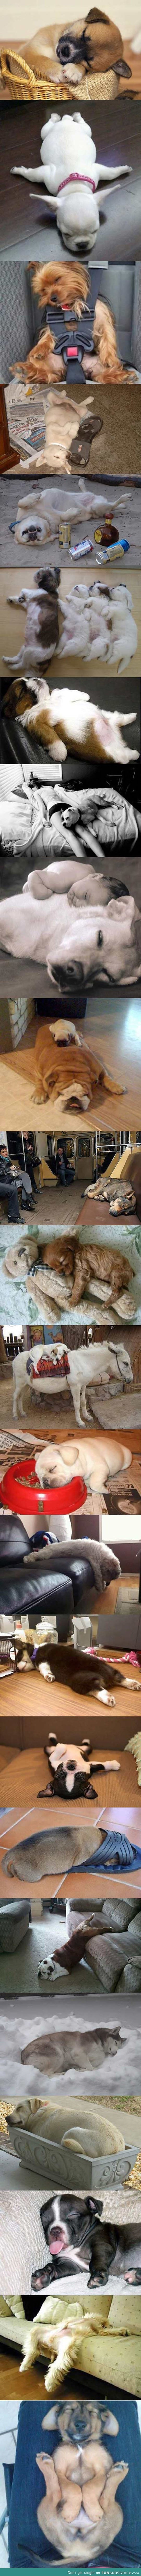 Dogs sleeping are so adorable